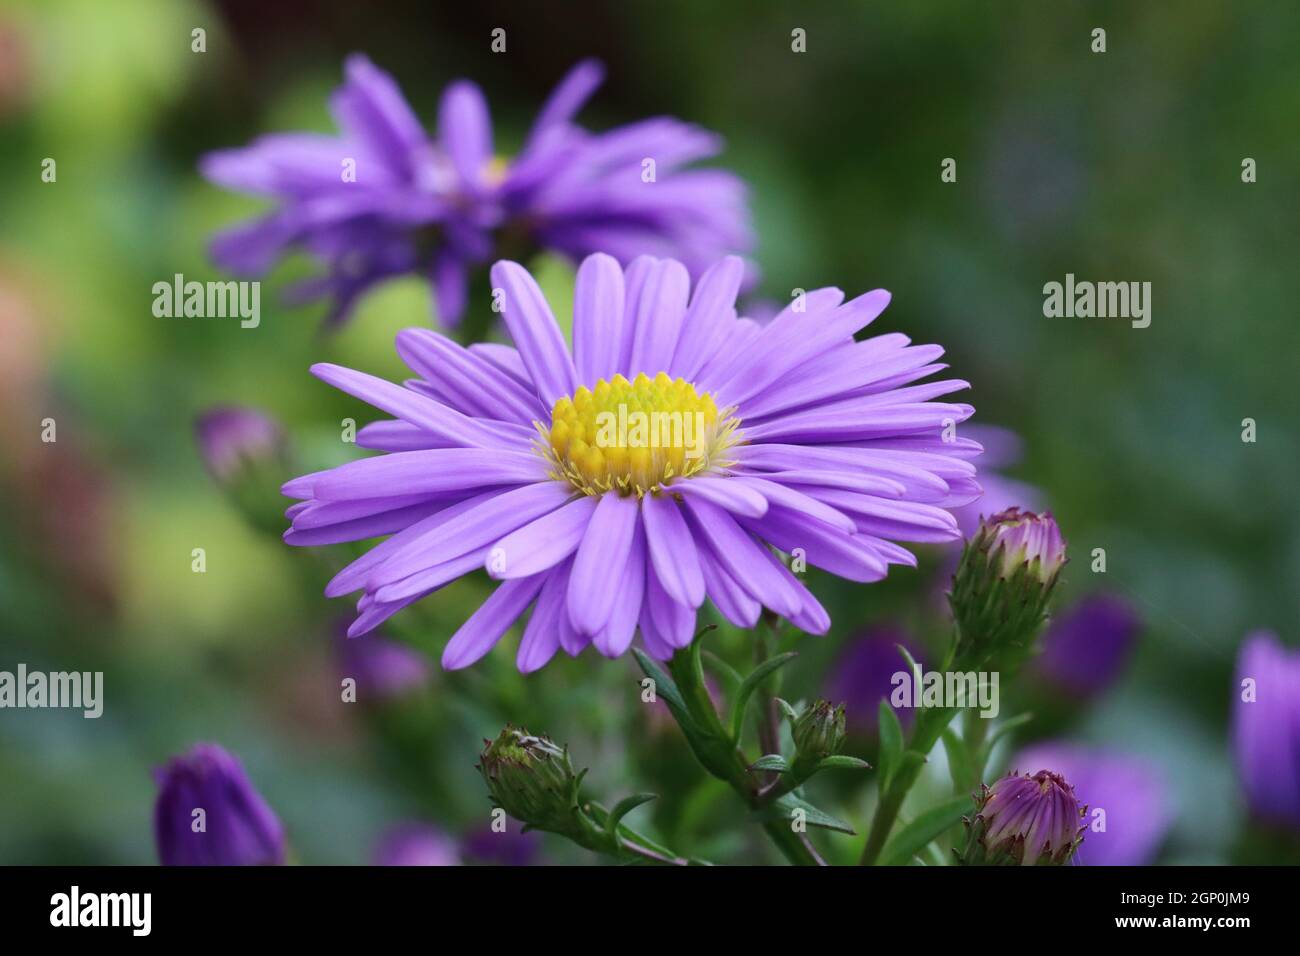 close-up of a pretty violet-blue flower of aster dumosus with several buds against a natural blurry background Stock Photo